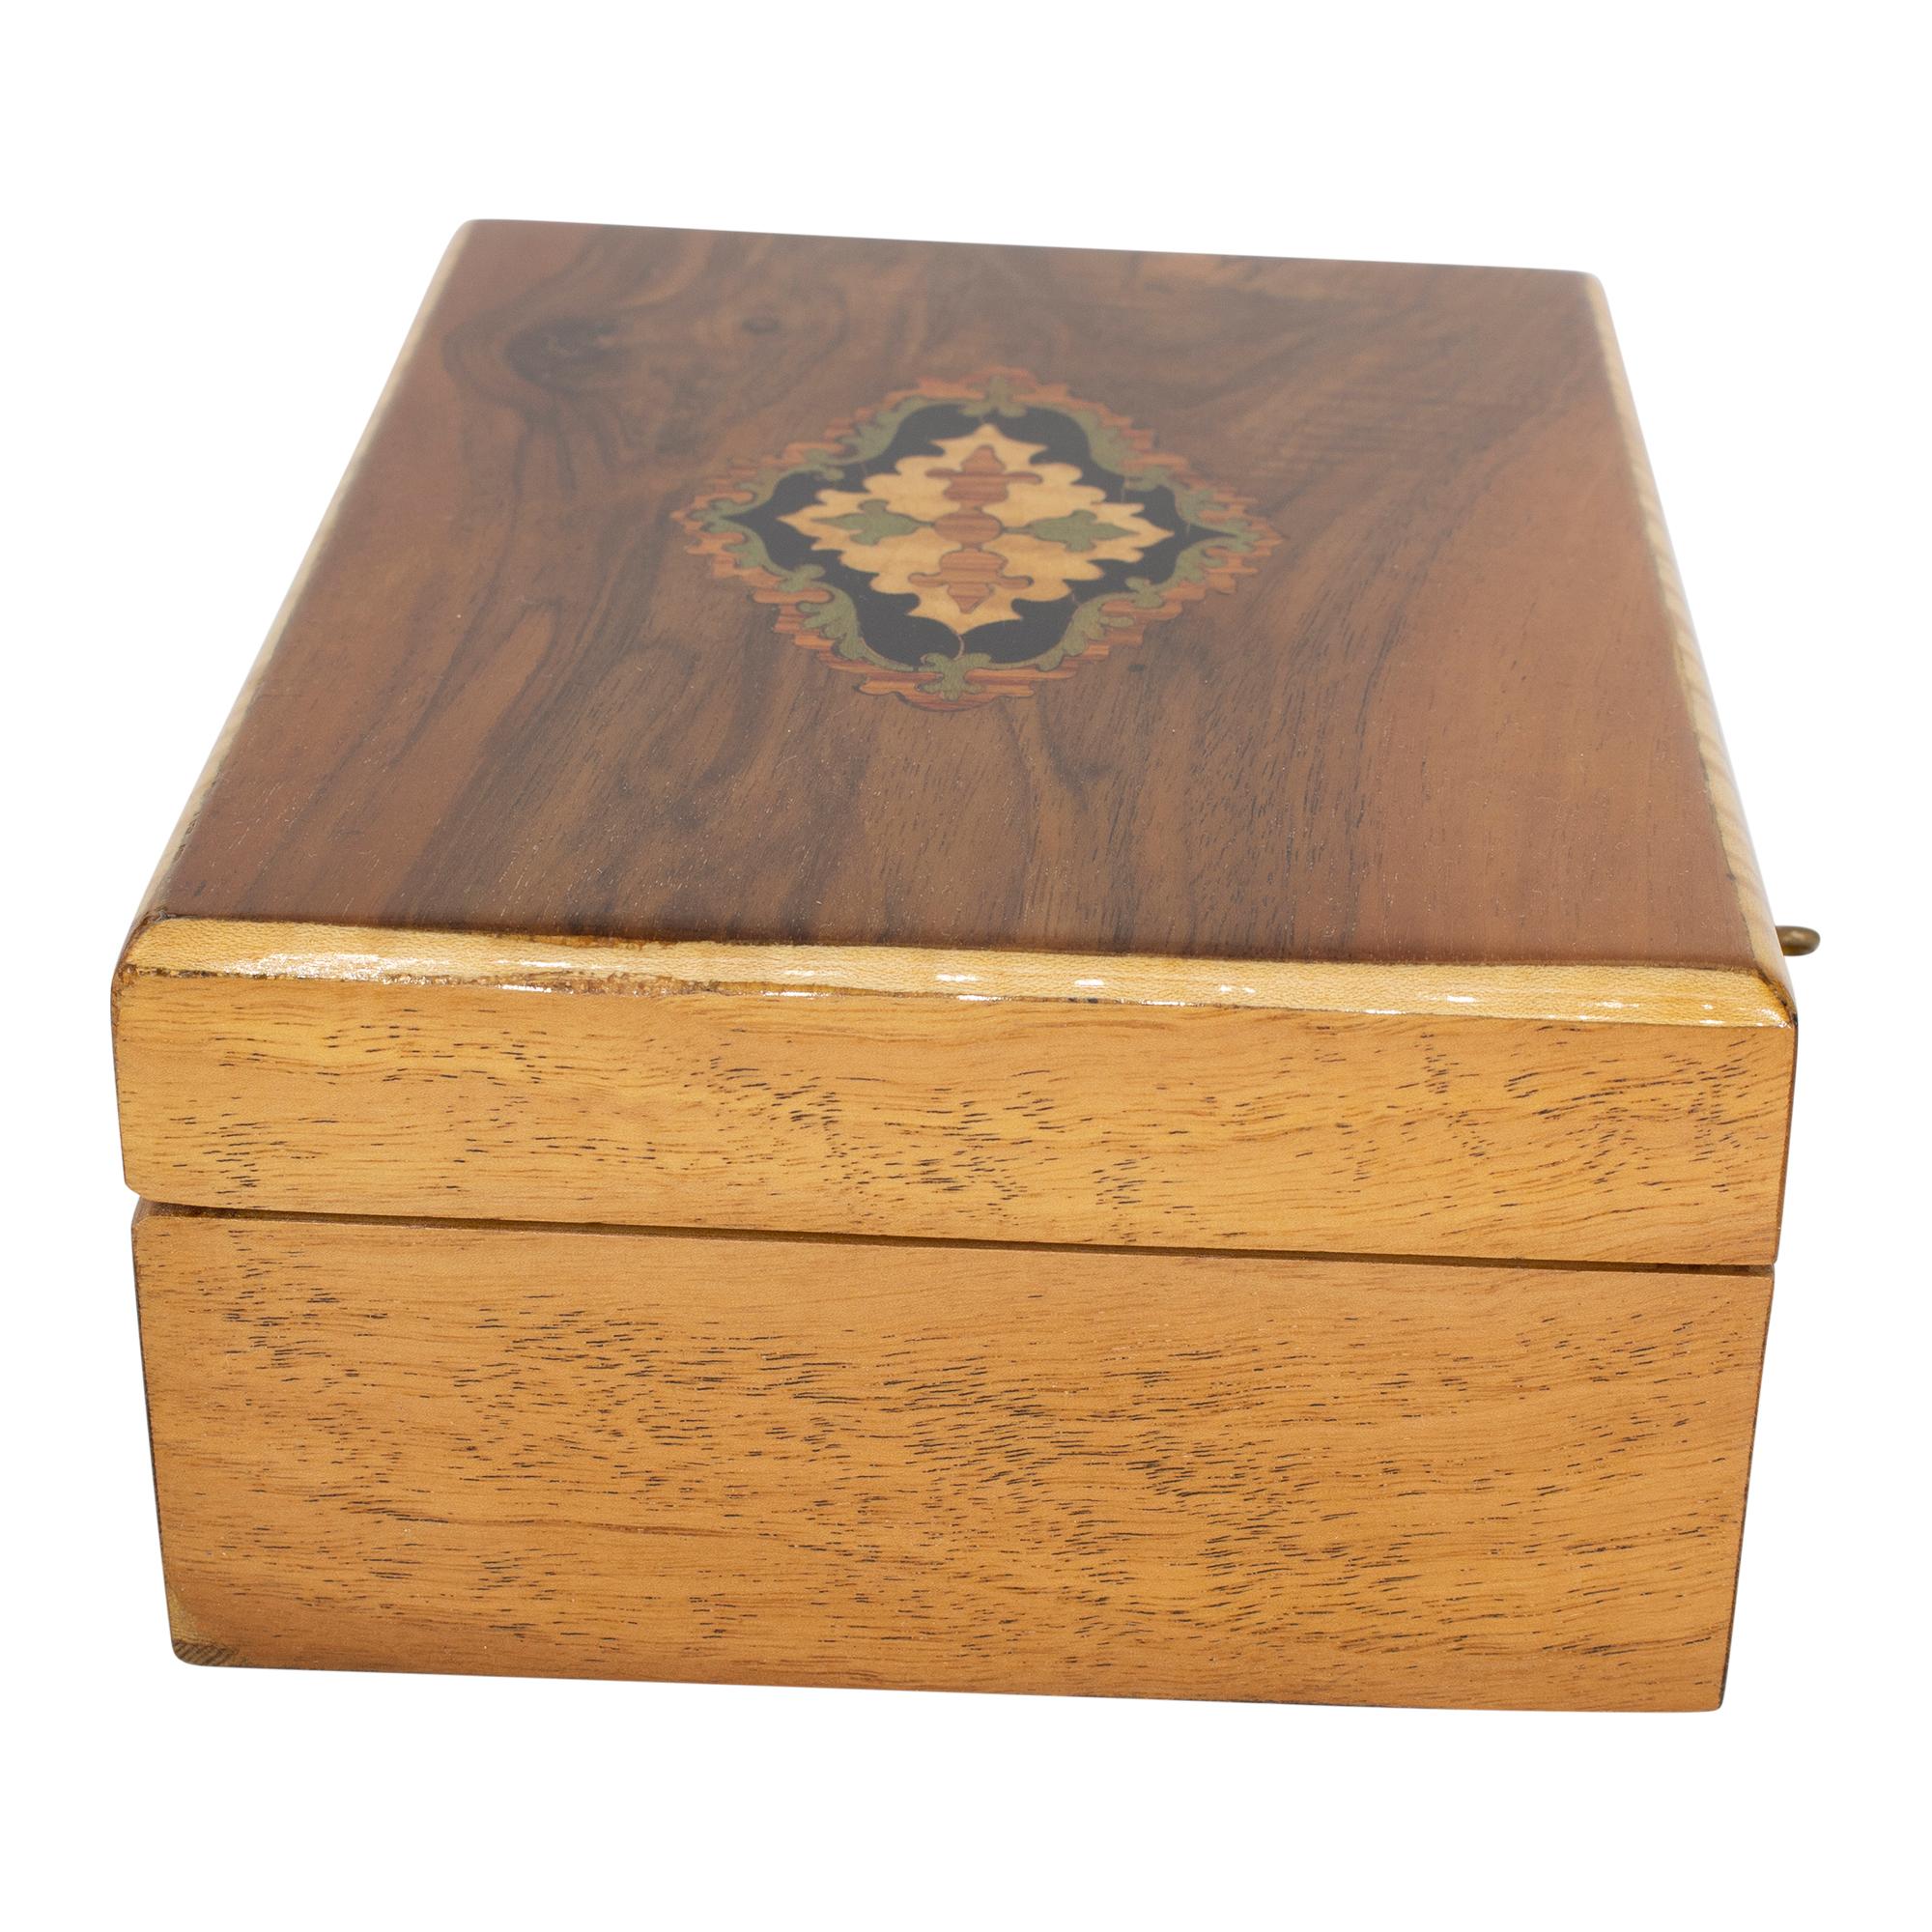 Beautiful box / casket from the Art Nouveau period, made of walnut veneer on a softwood body. The top edge is trimmed with maple and in the center of the lid is a very beautiful veneer work. In very good restored condition.